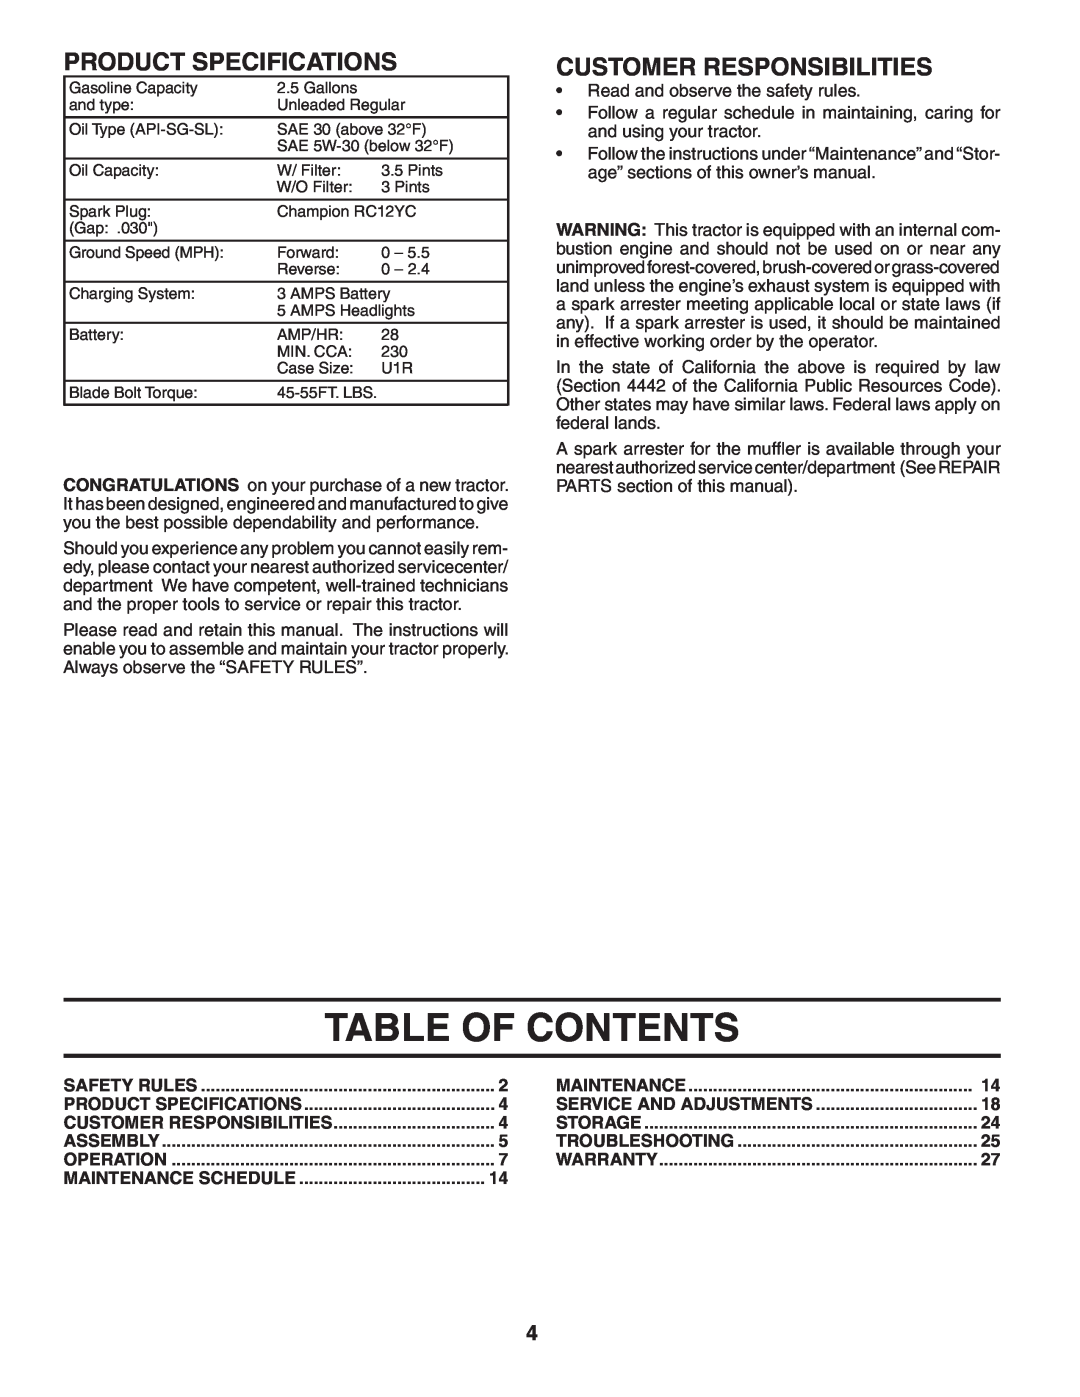 Poulan 402993 manual Table Of Contents, Product Specifications, Customer Responsibilities 